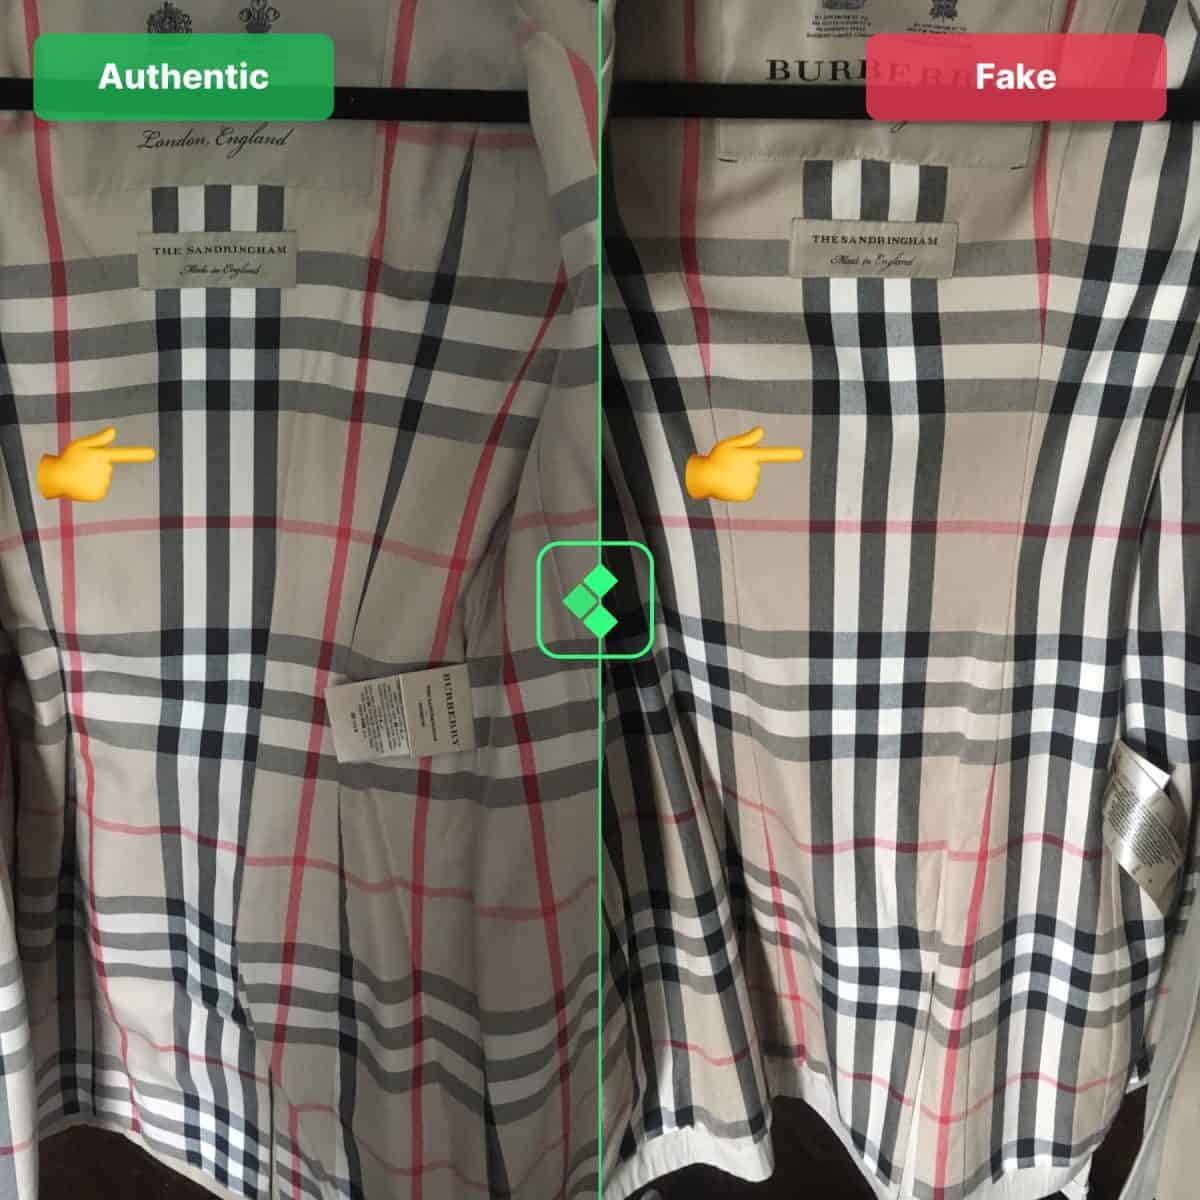 How To Spot Fake Burberry Coats In 2021 - Fake Vs Real Burberry 